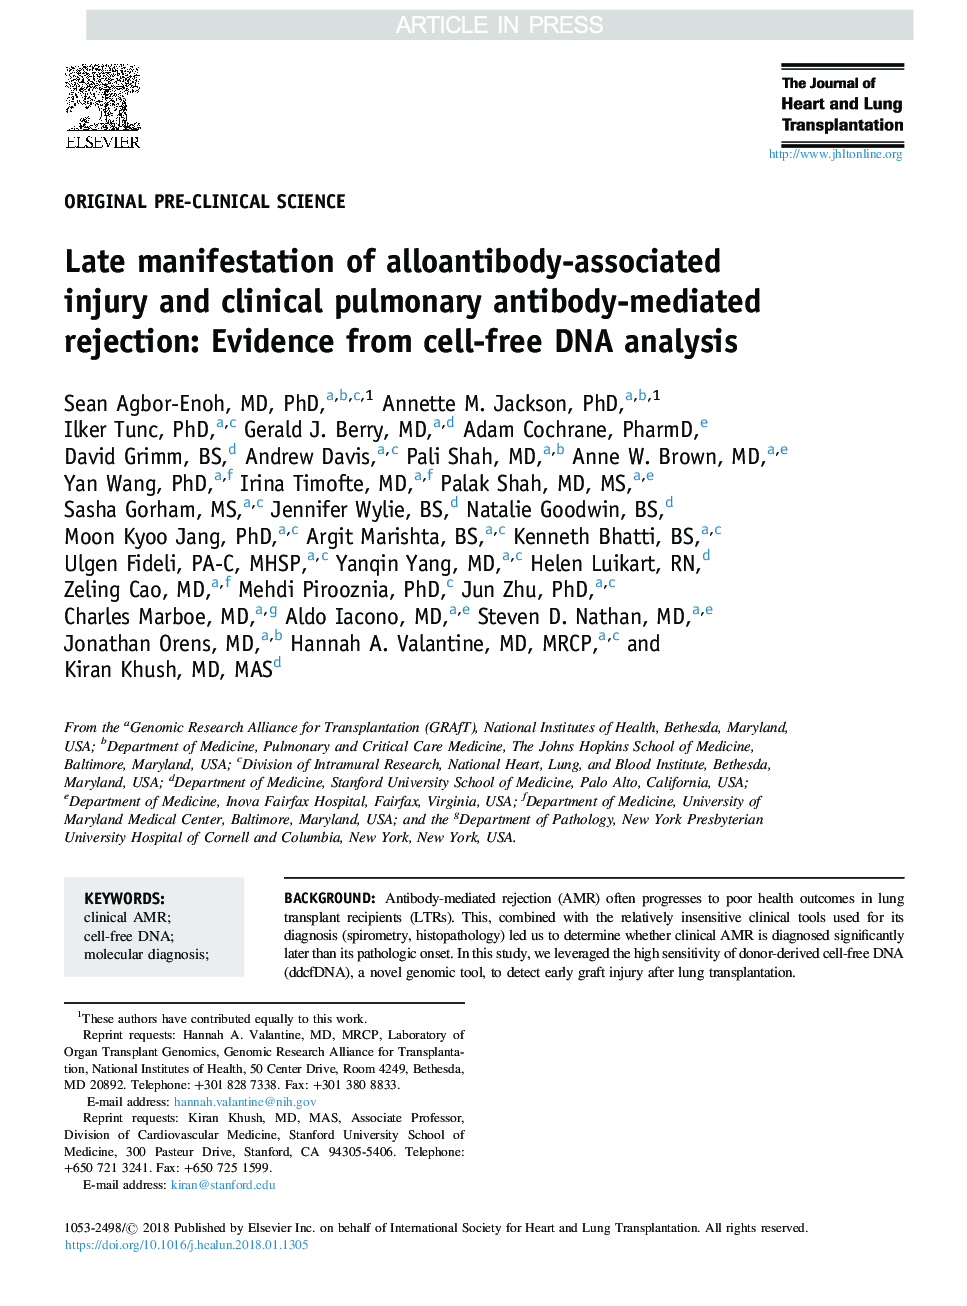 Late manifestation of alloantibody-associated injury and clinical pulmonary antibody-mediated rejection: Evidence from cell-free DNA analysis